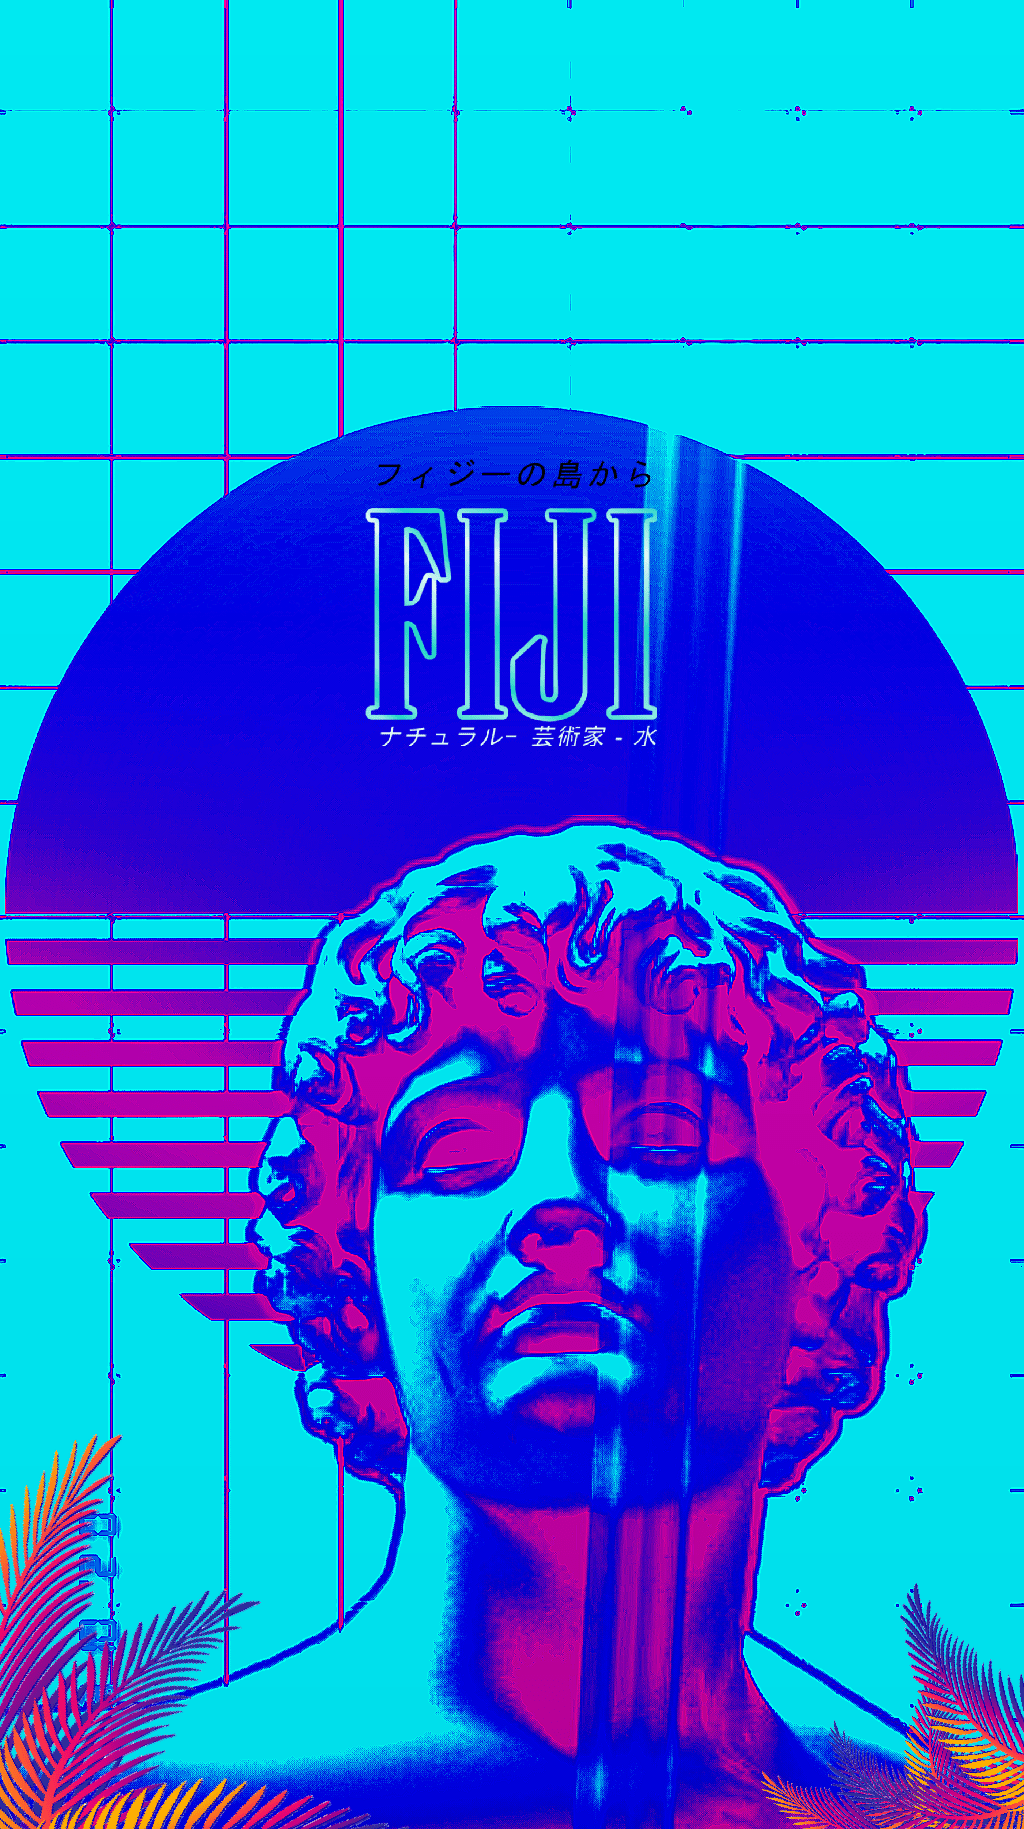 Vaporwave phone wallpaper made by me :)